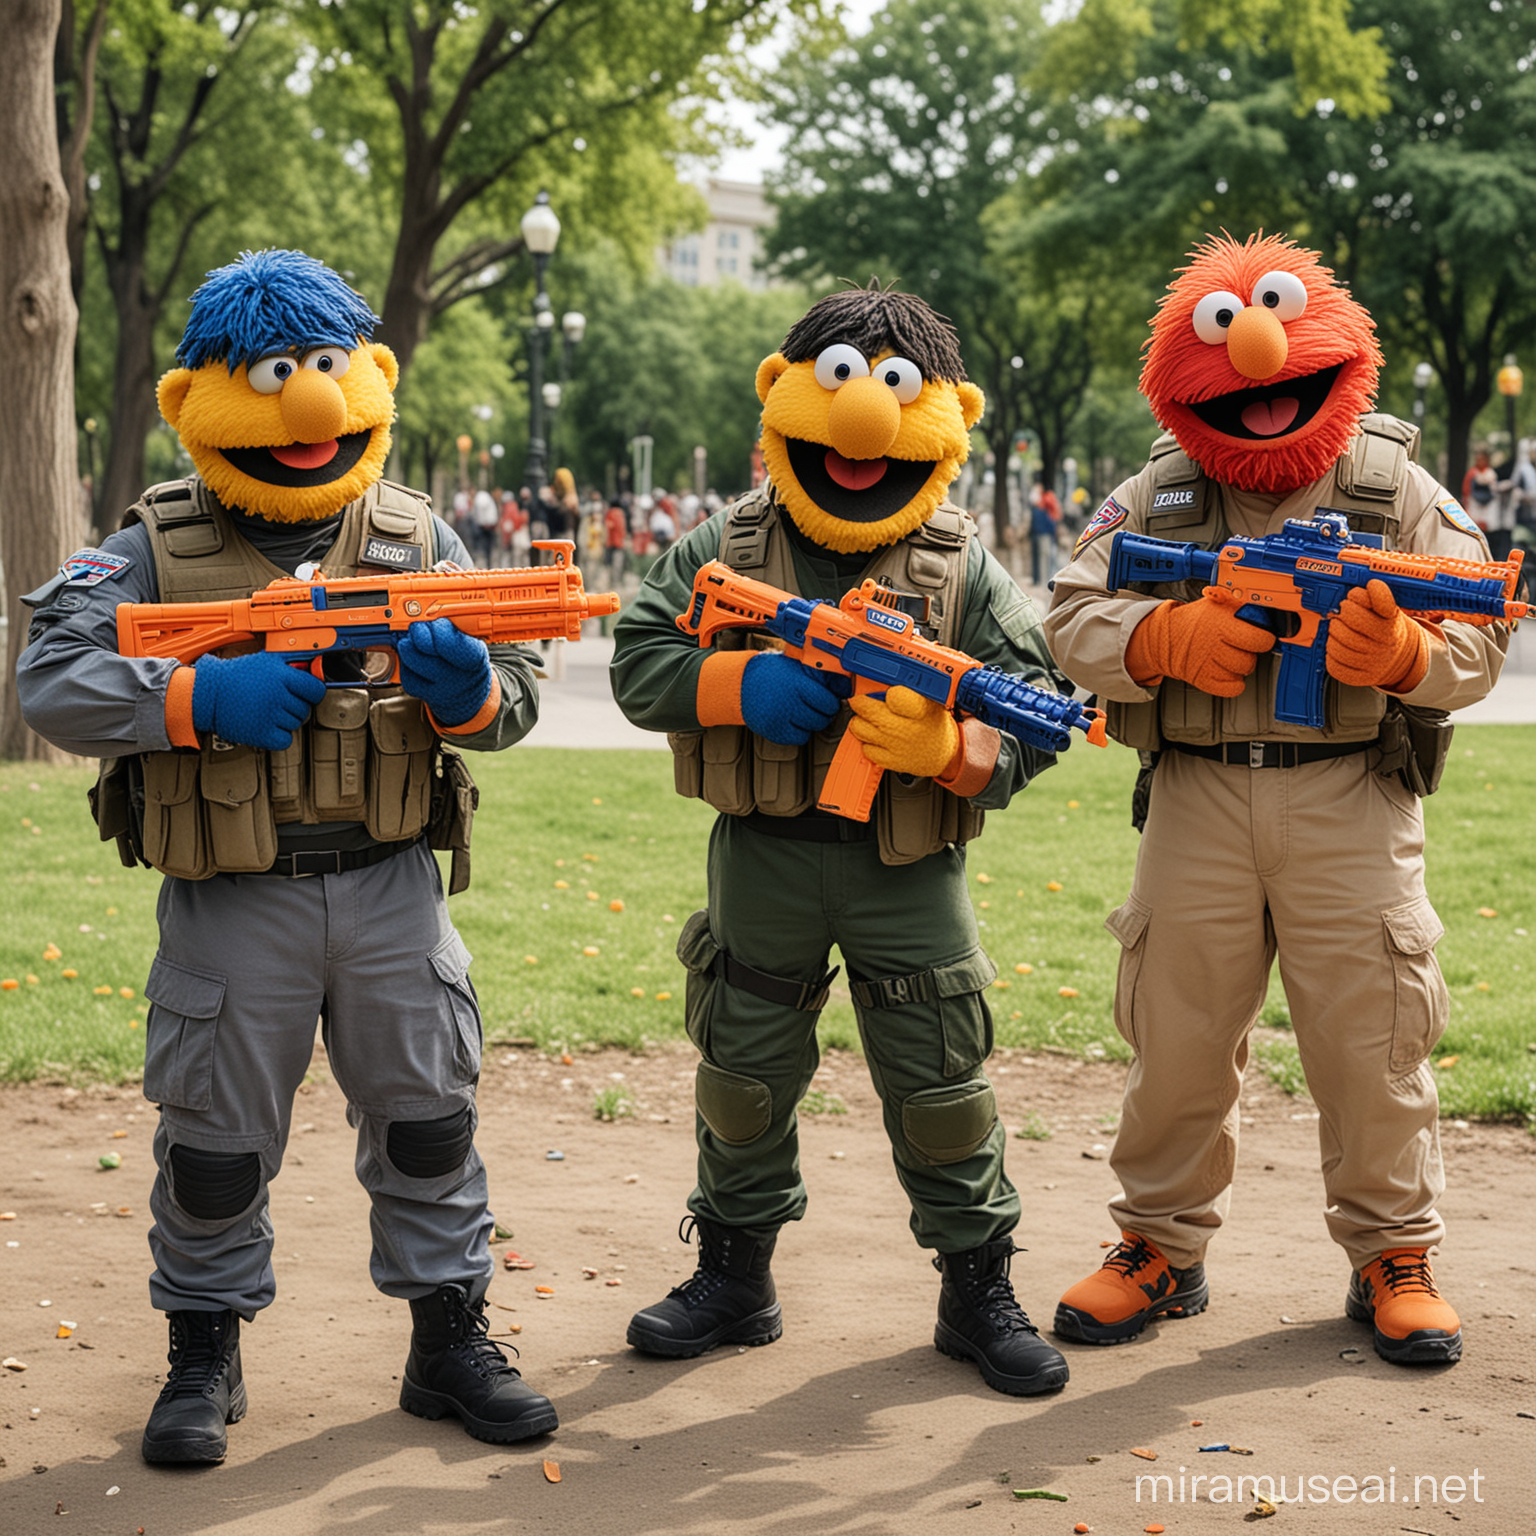 Ernie and friends from Sesame Street wearing combat gear and playing with Nerf guns in a city park